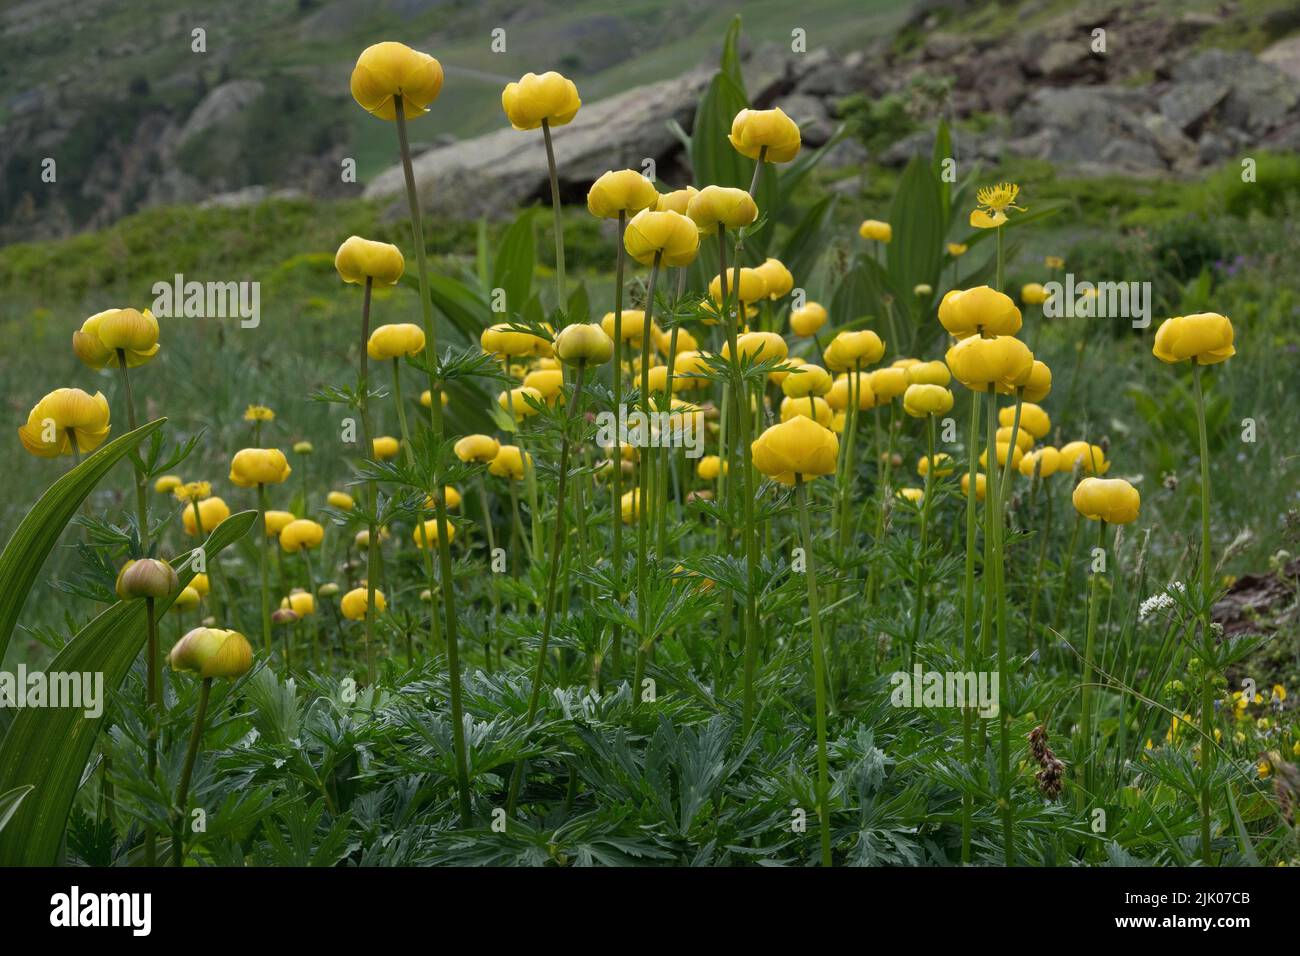 Group of Globeflowers, blooming yellow, in alpine landscape Stock Photo